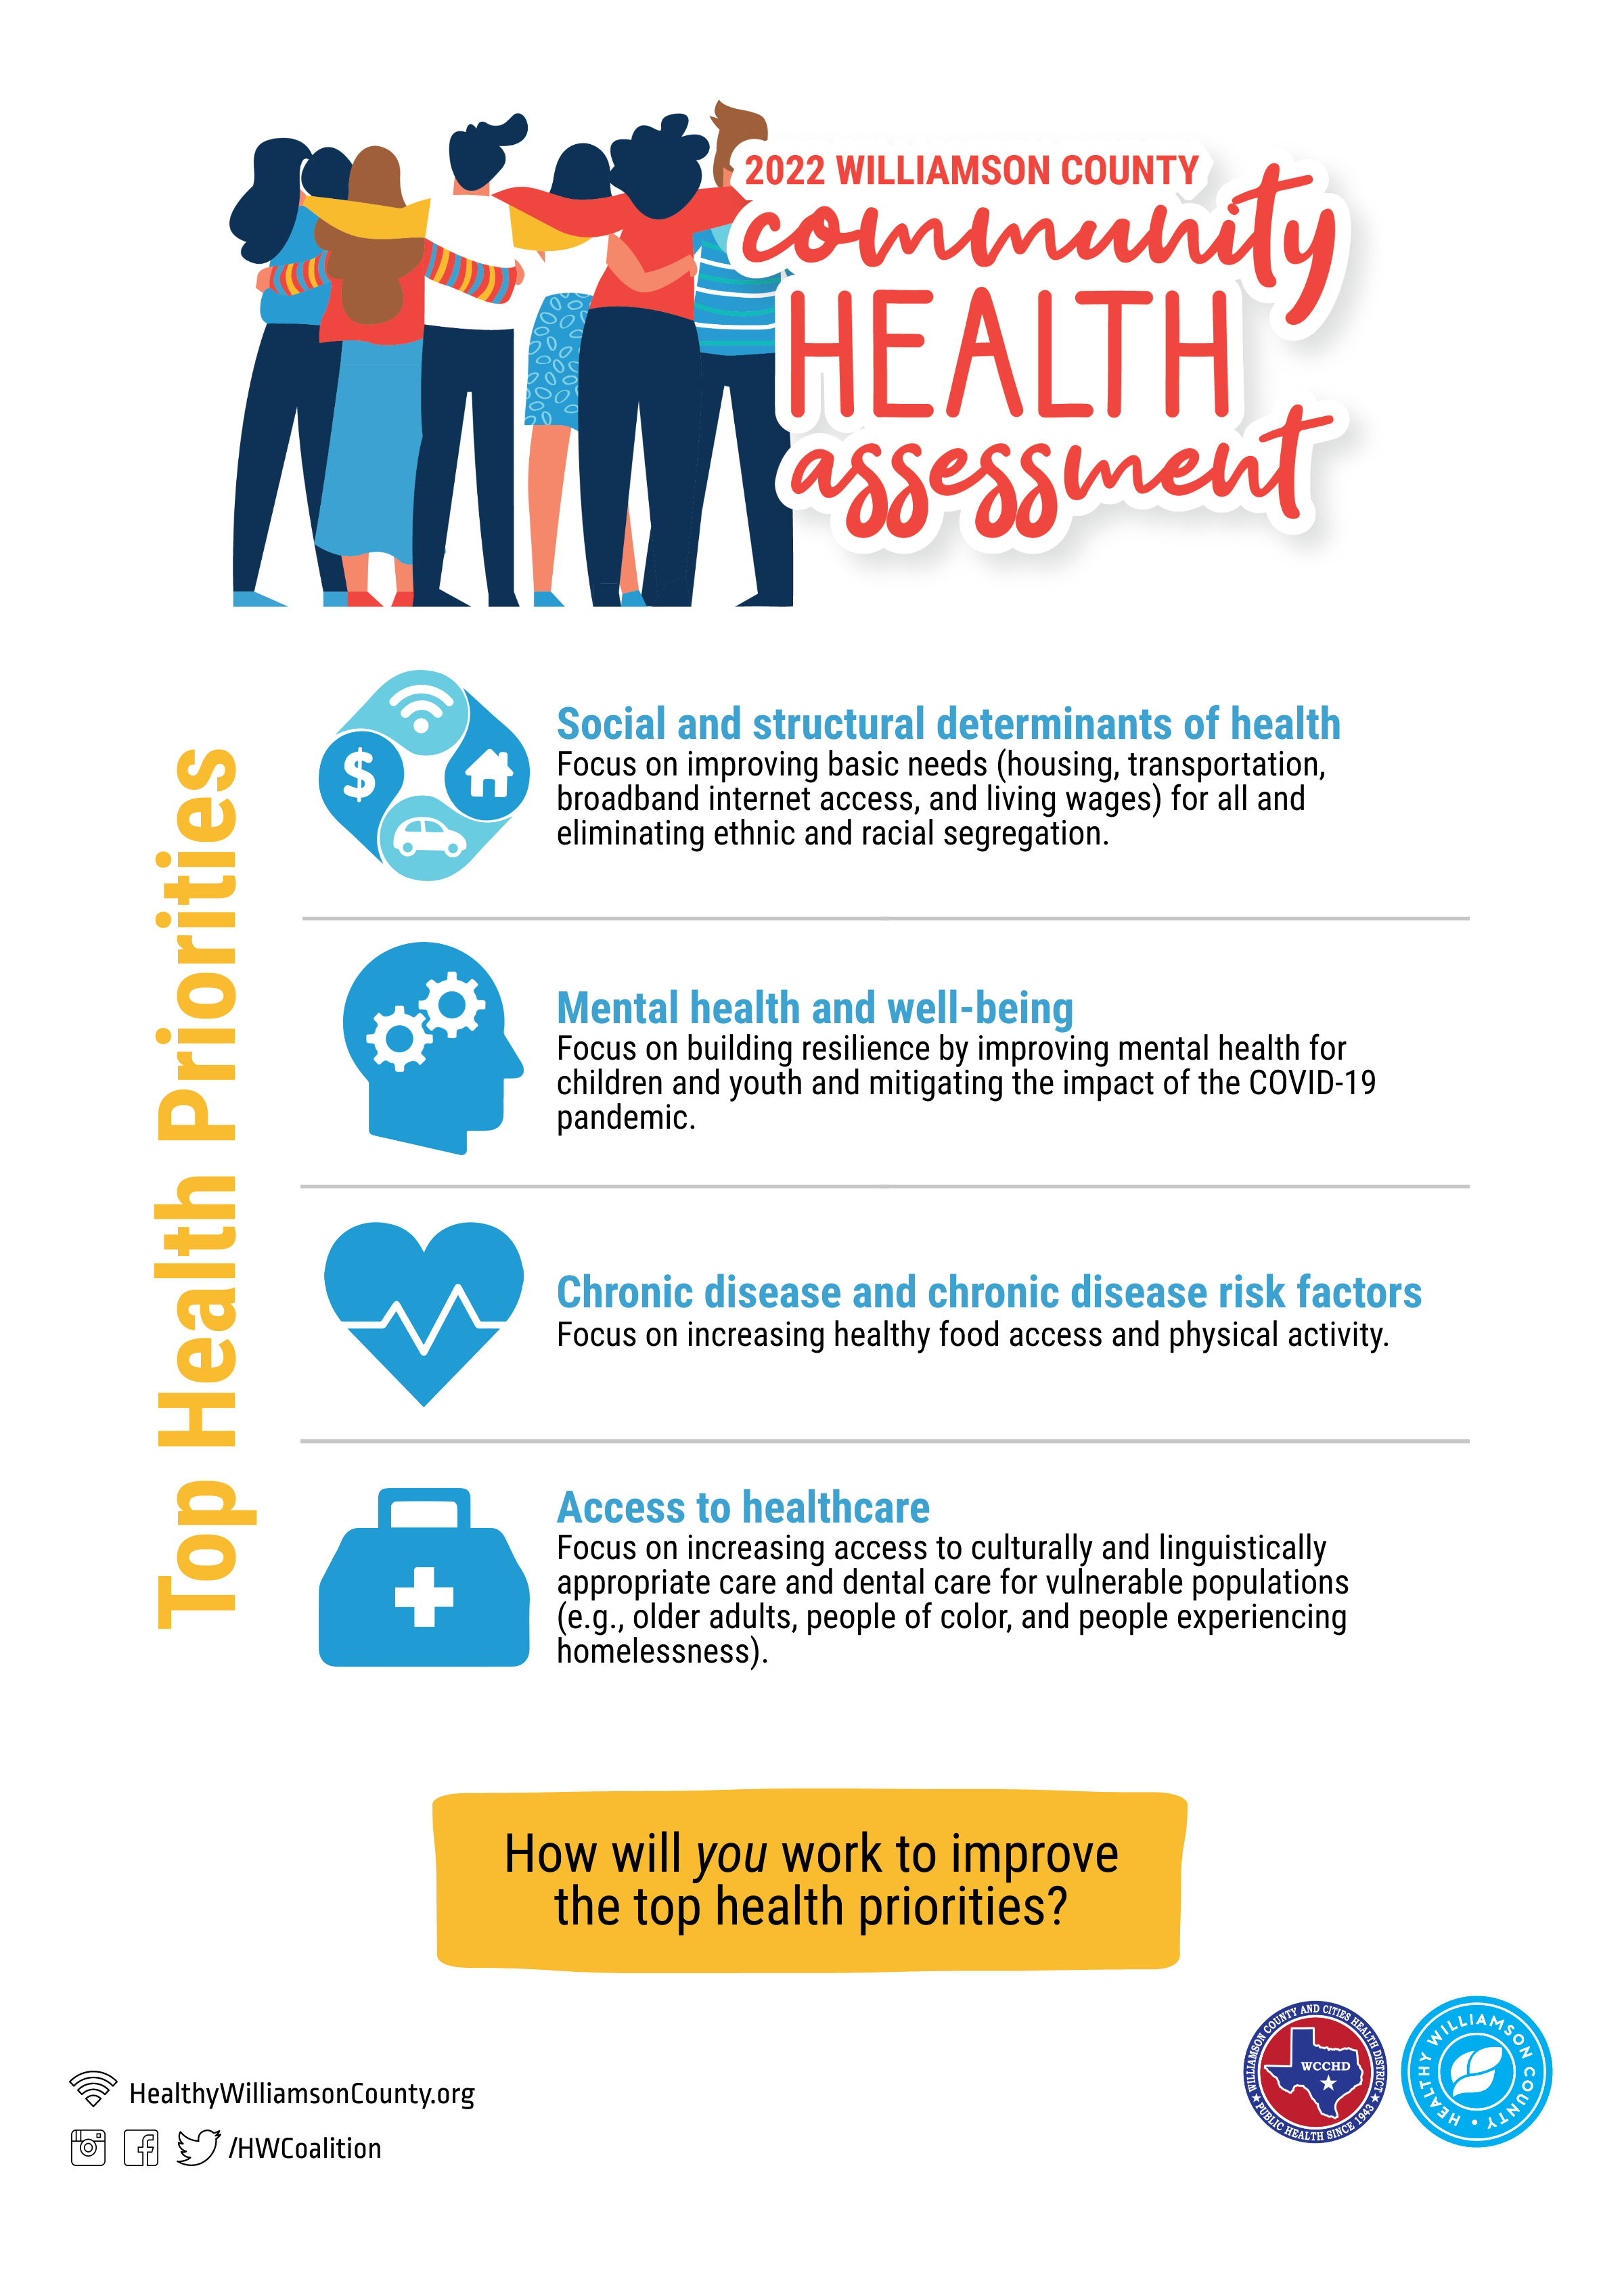 2022 community health assessment infographic about the top health priorities